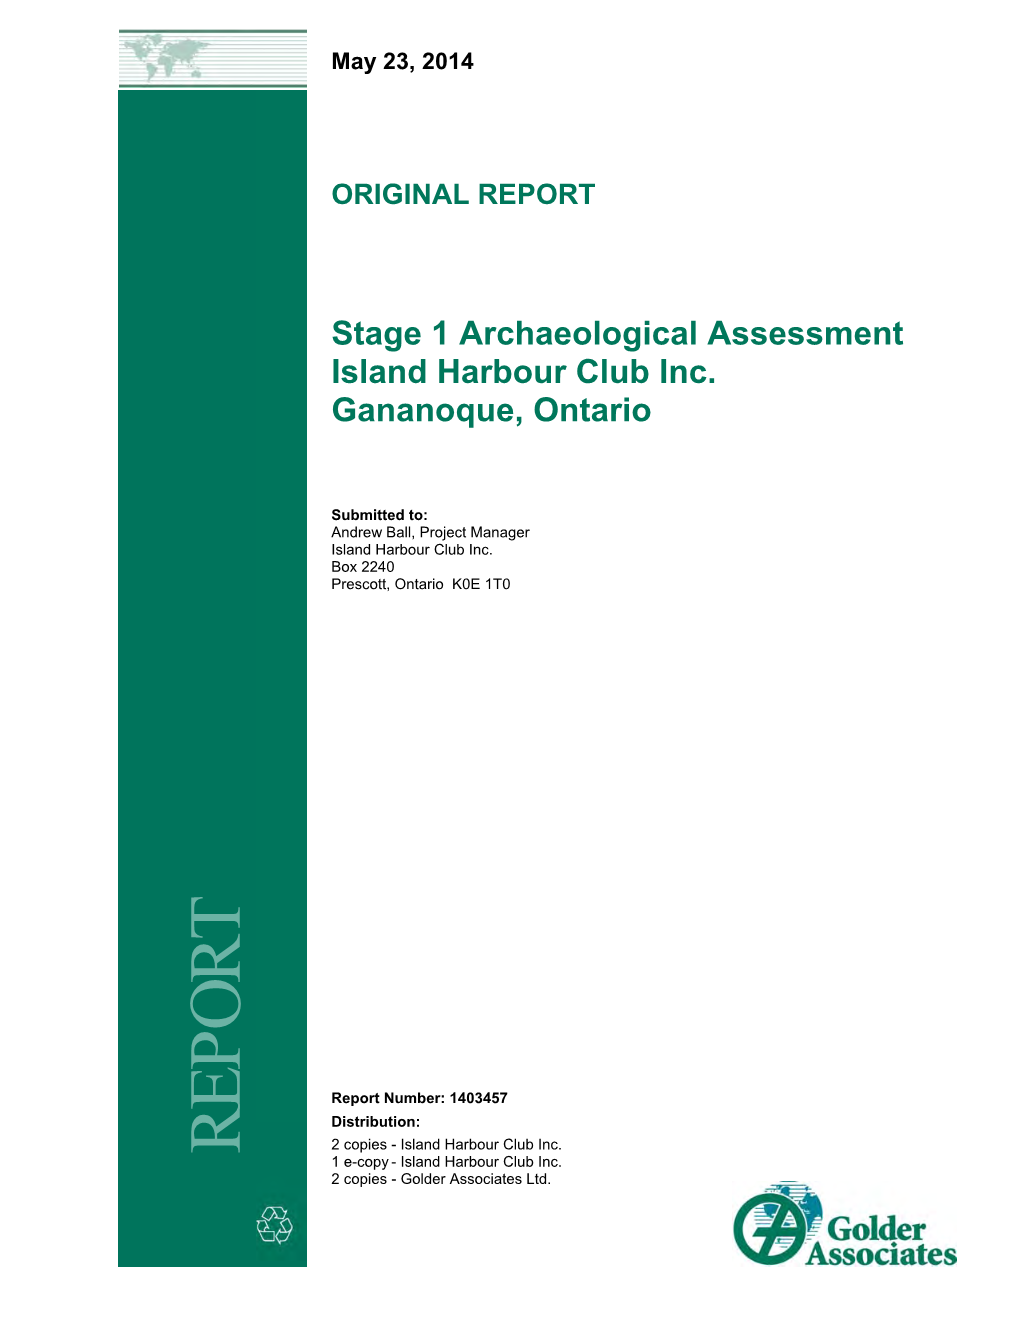 Stage 1 Archaeological Assessment Island Harbour Club Inc